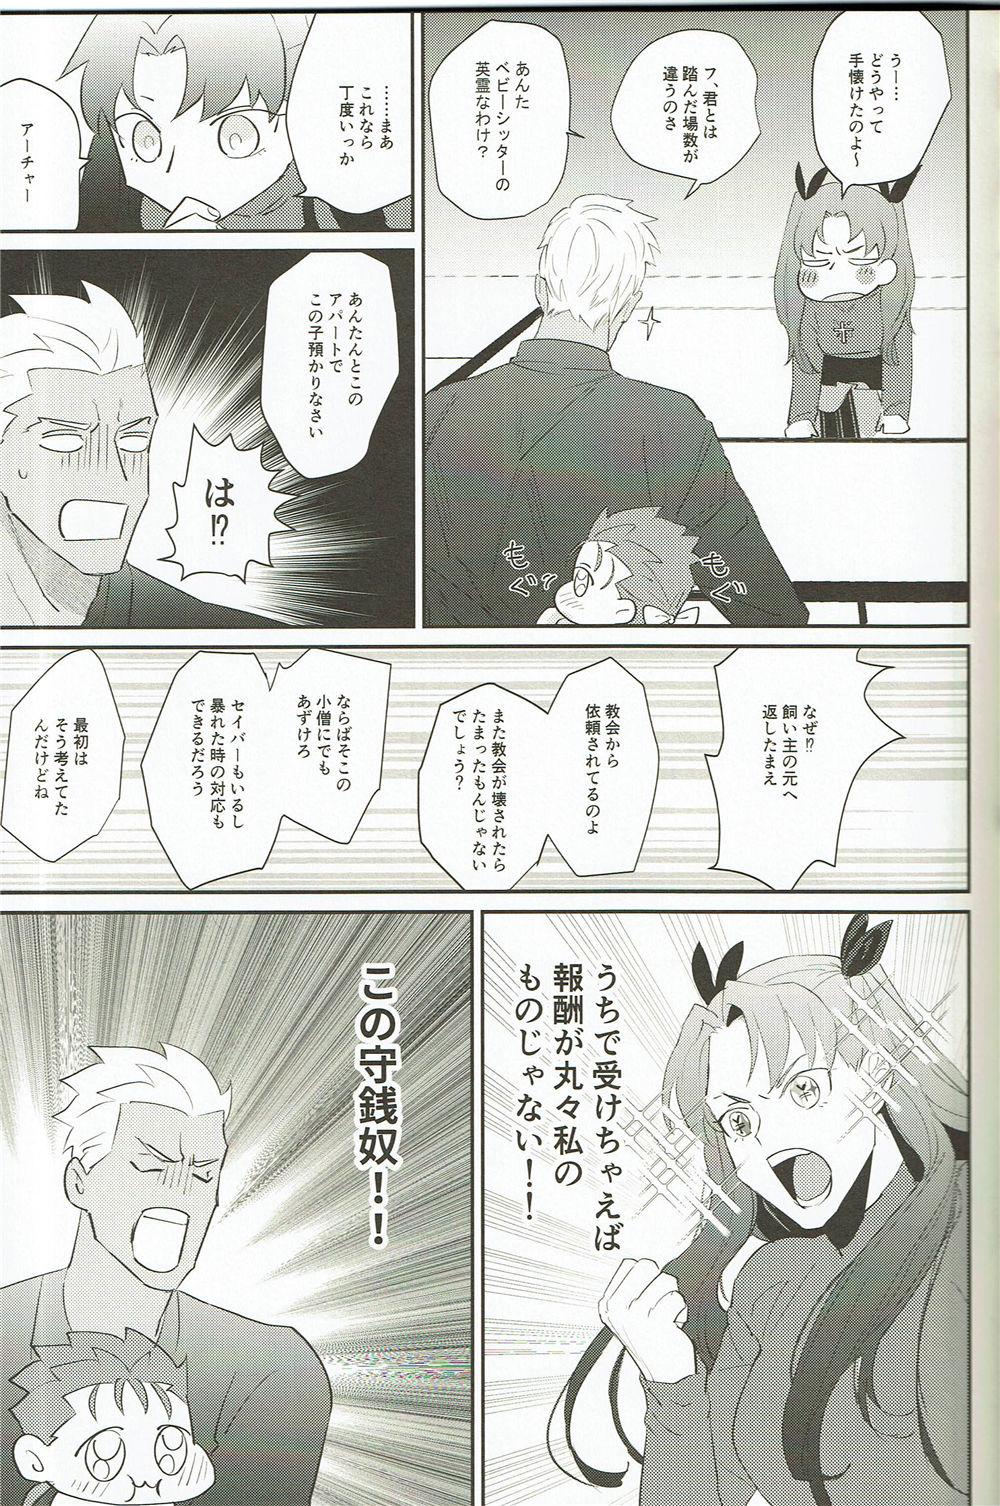 Abuse My Little Buddy - Fate stay night Yoga - Page 8